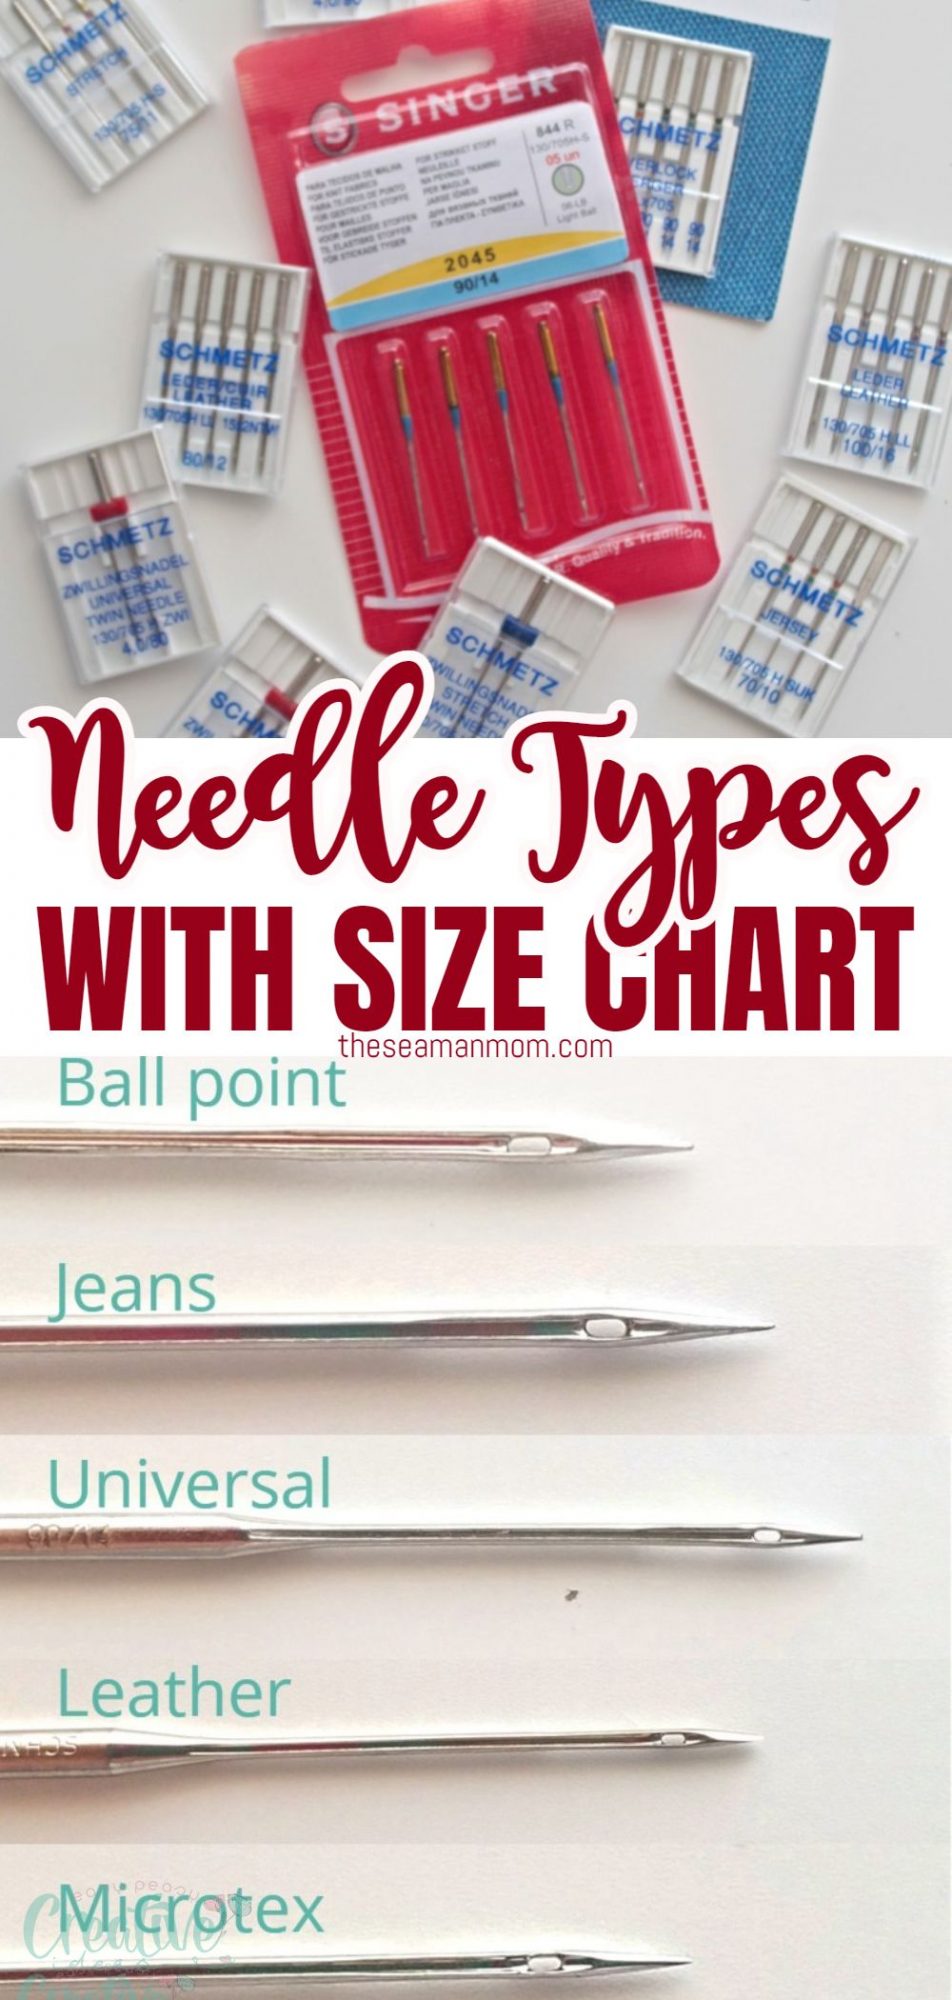 Sewing needle types with size chart